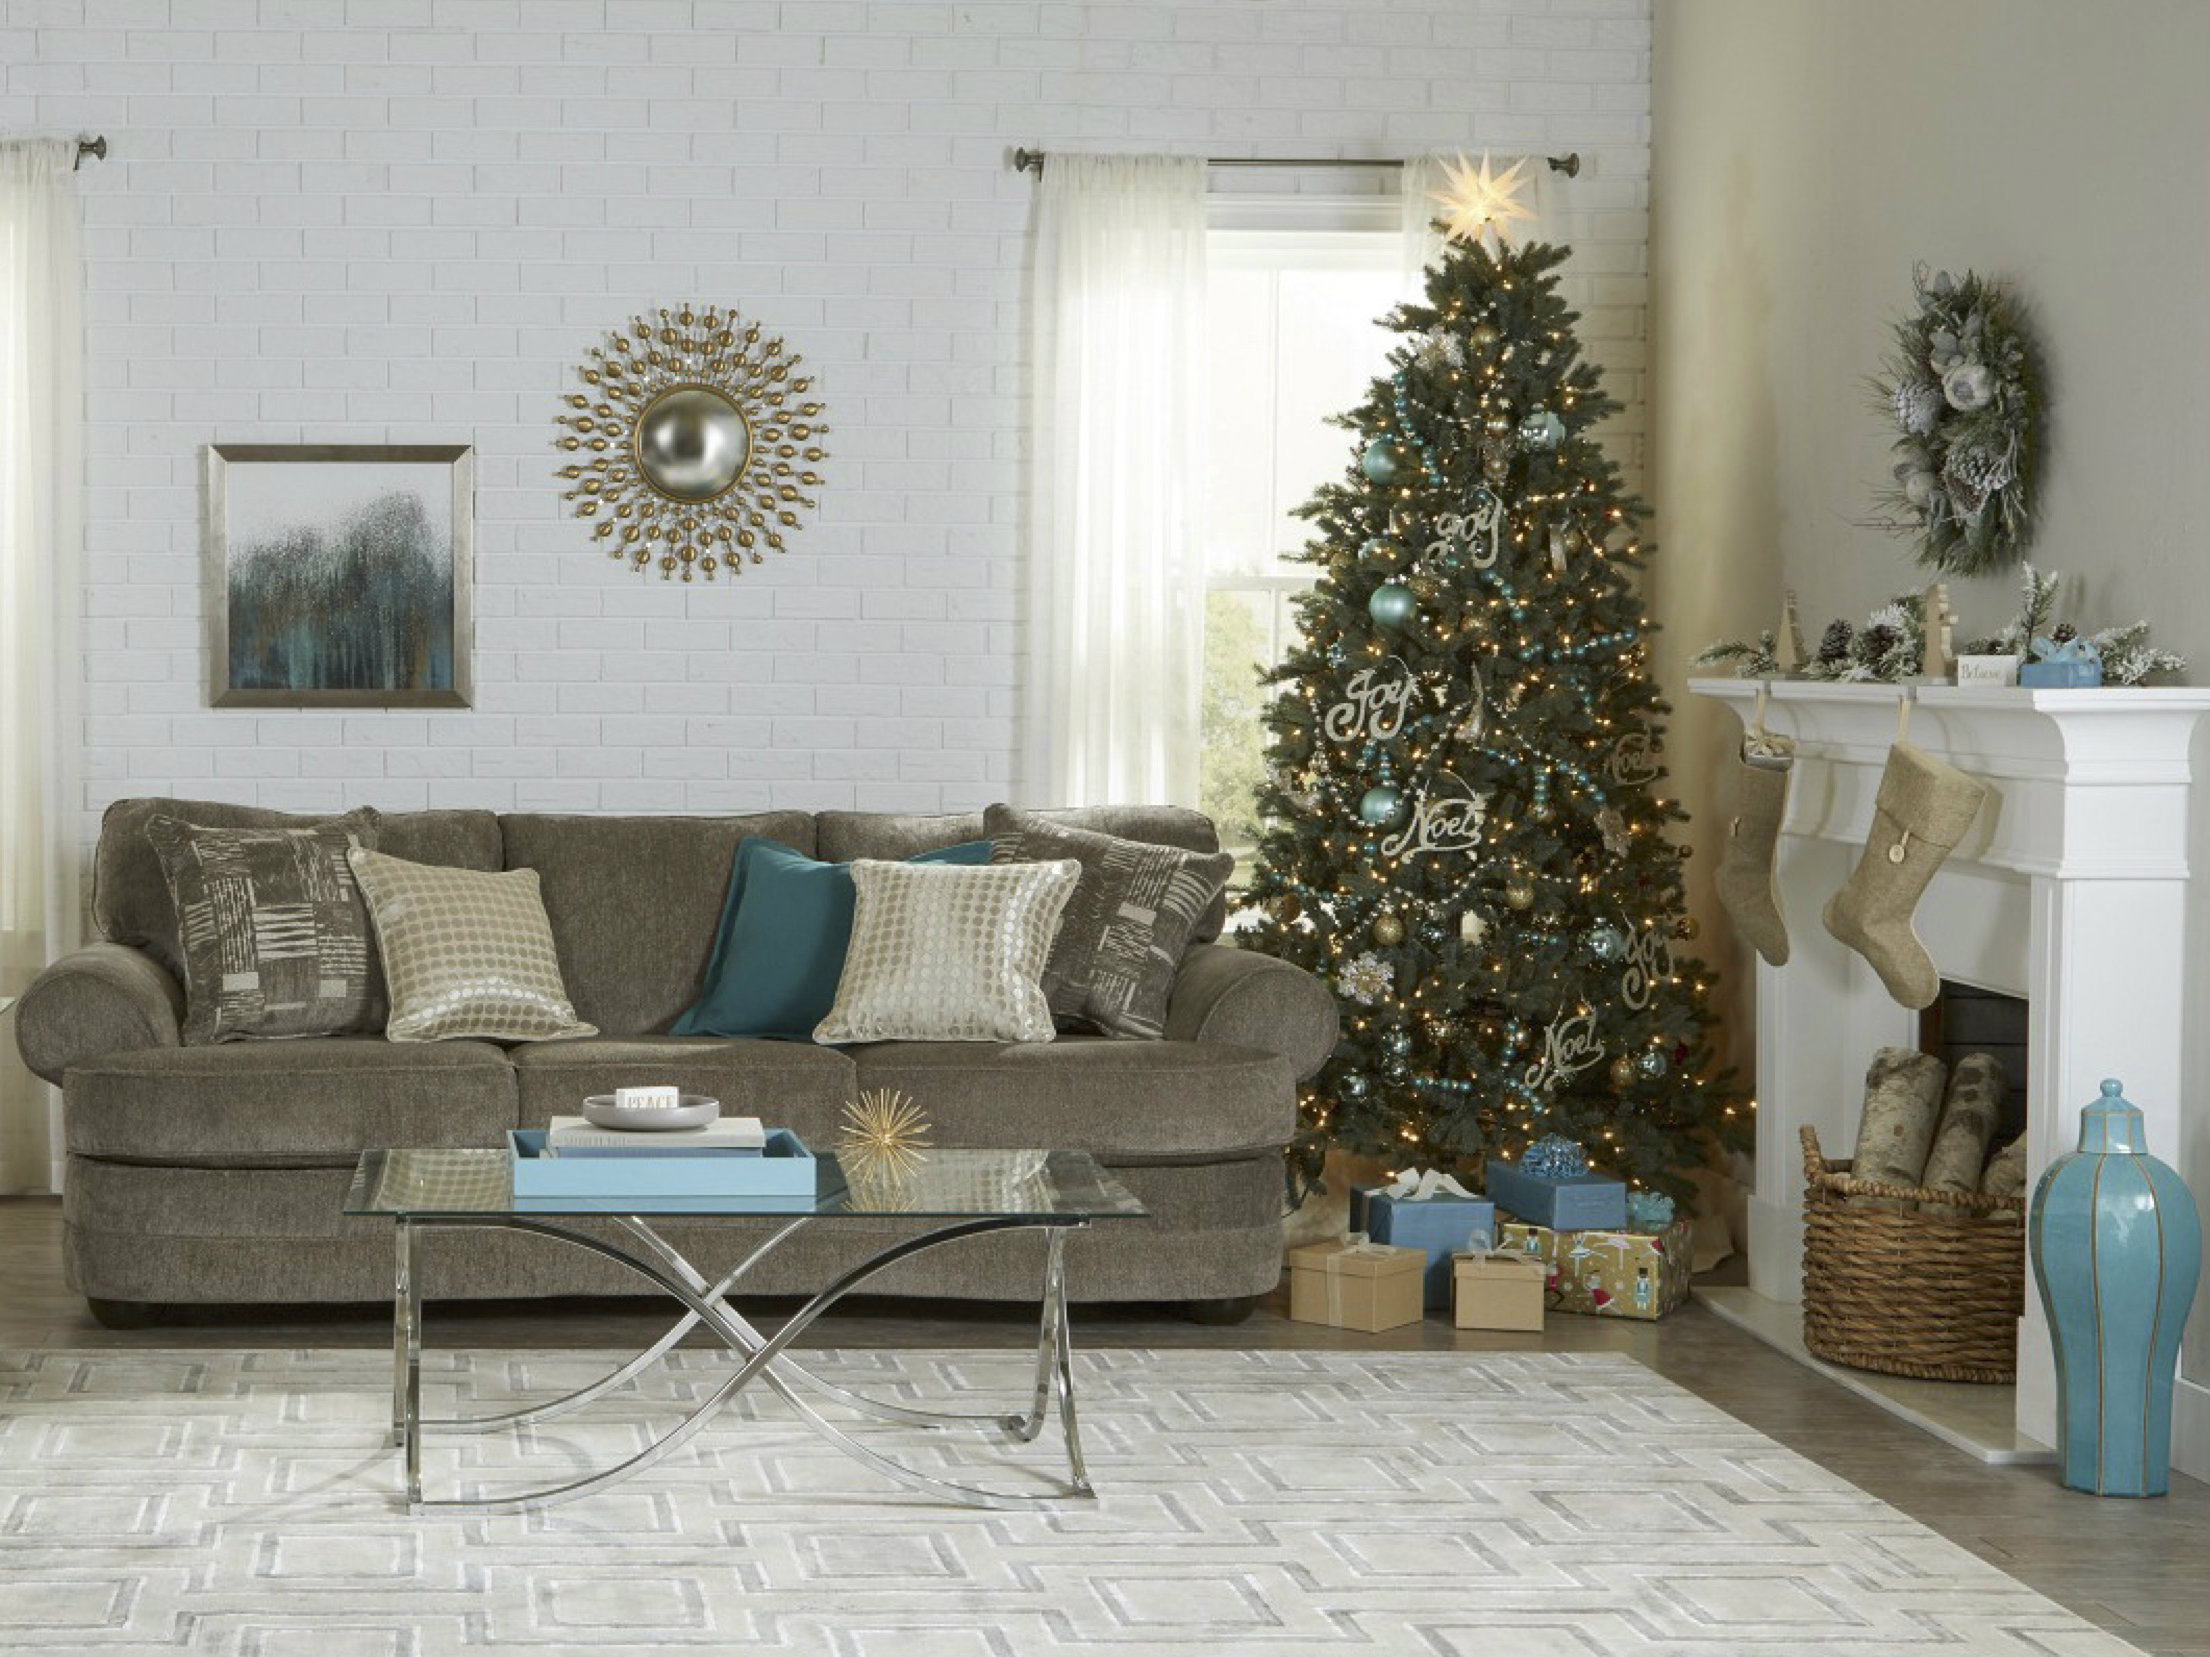 13 On-Trend Ideas for Decorating Your Home for the Holidays